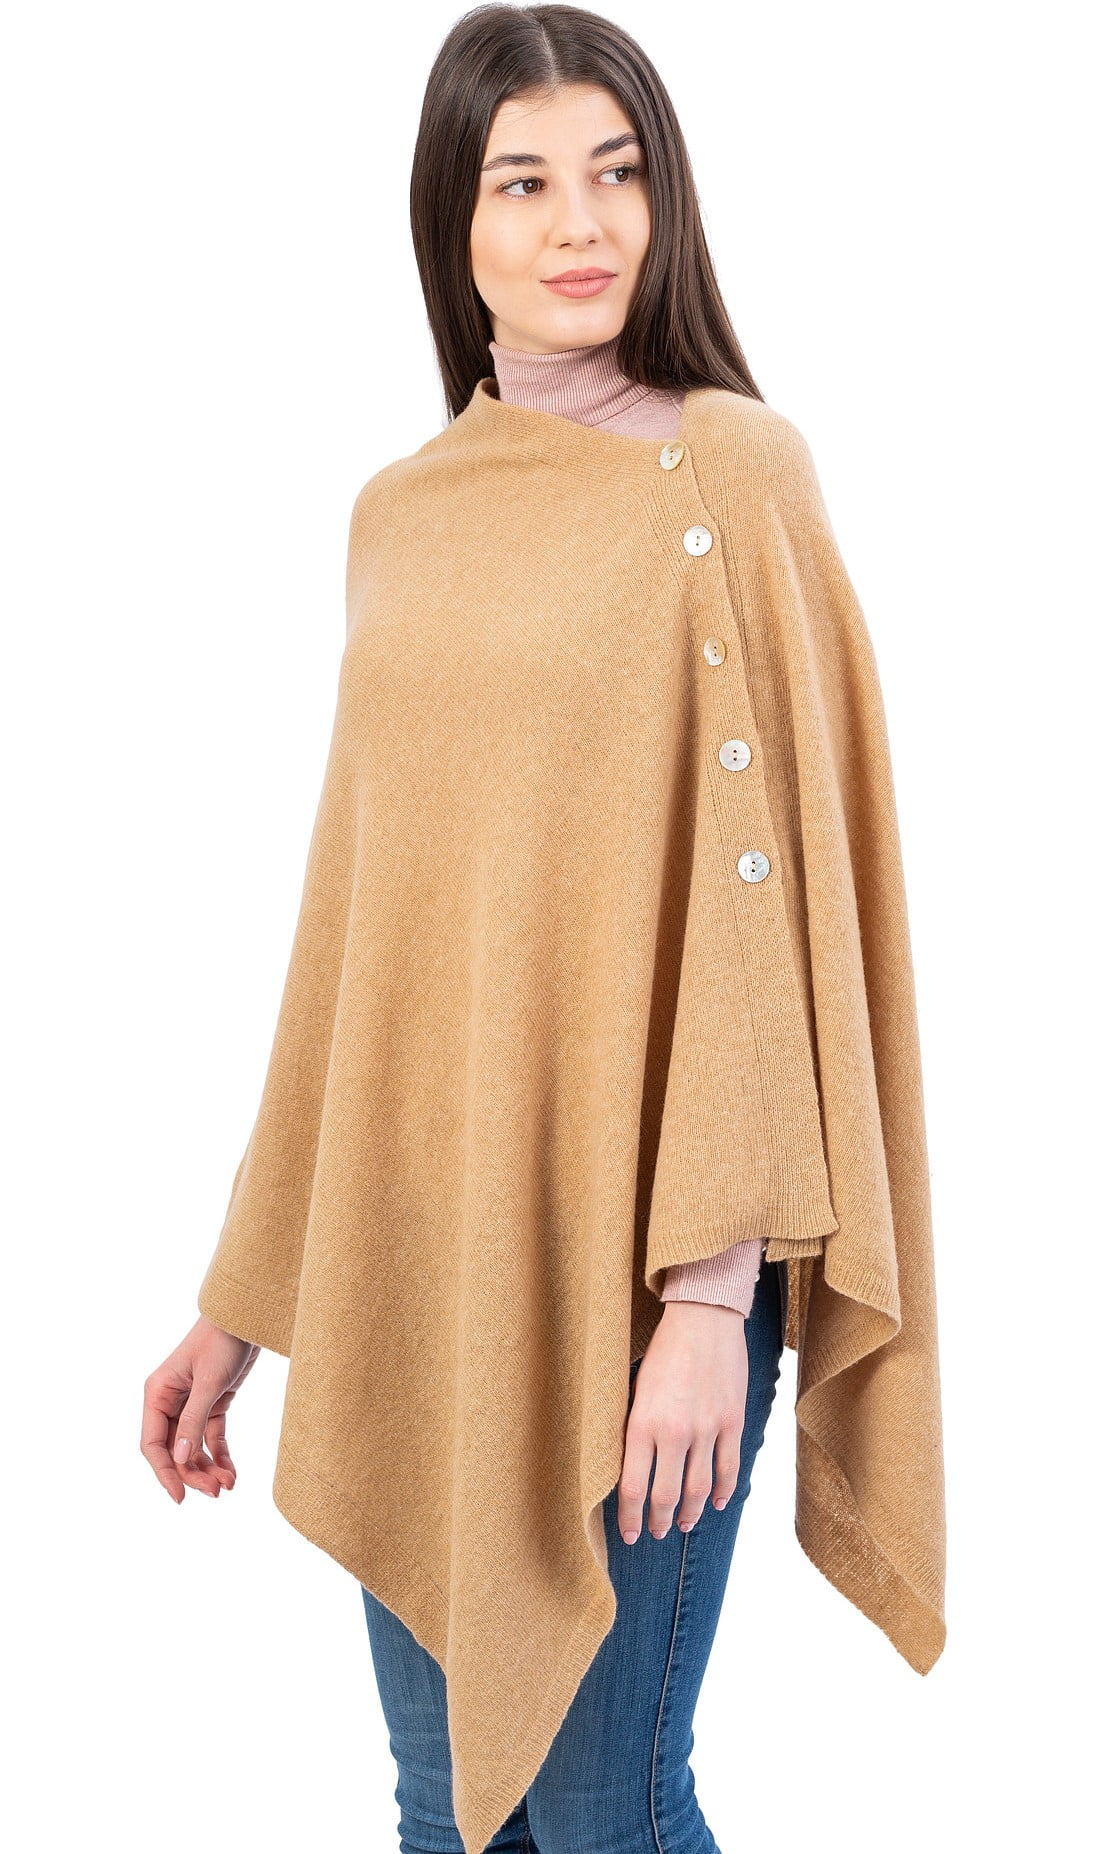 New Womens Poncho 3 Button Ladies Long Knit Cape Shawl Jumper Top One Size 8-18 